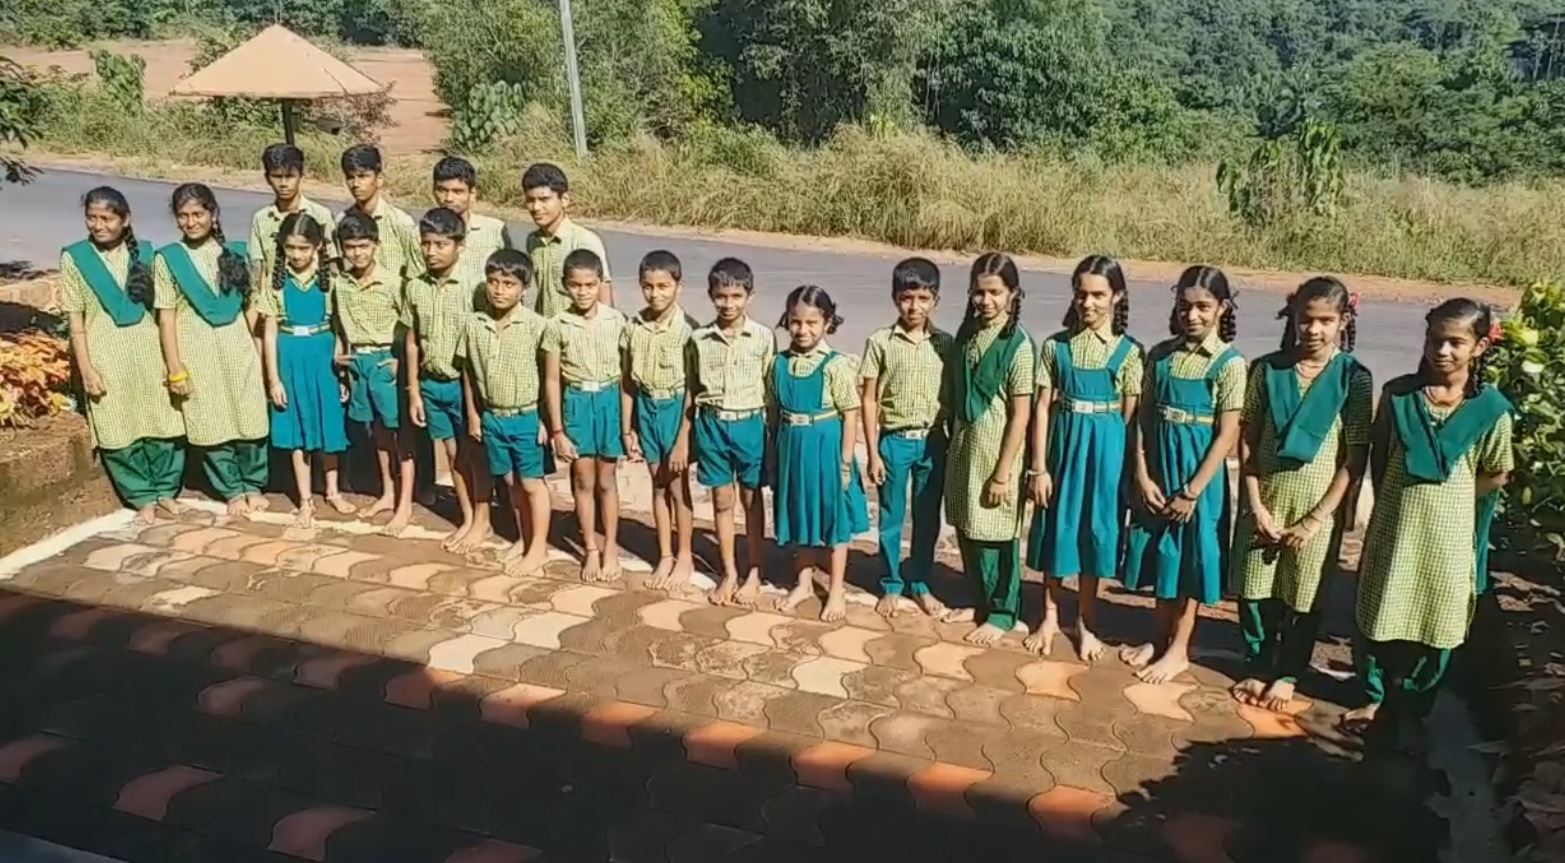 11 set of twins in same school